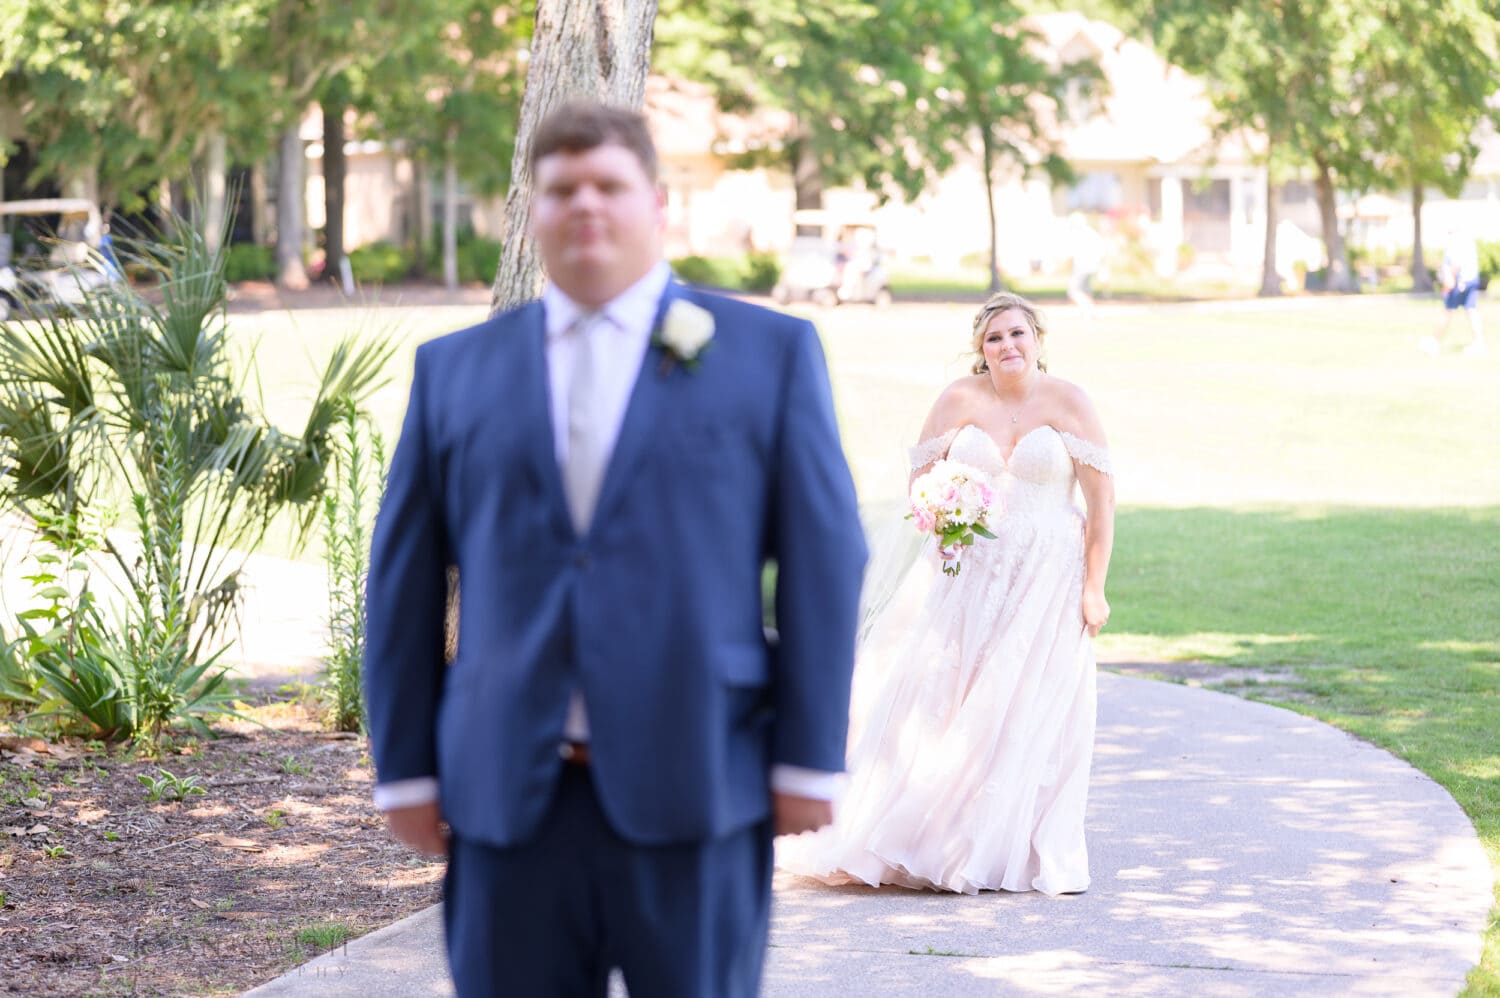 First look with the bride and groom on the golfcourse - Pawleys Plantation